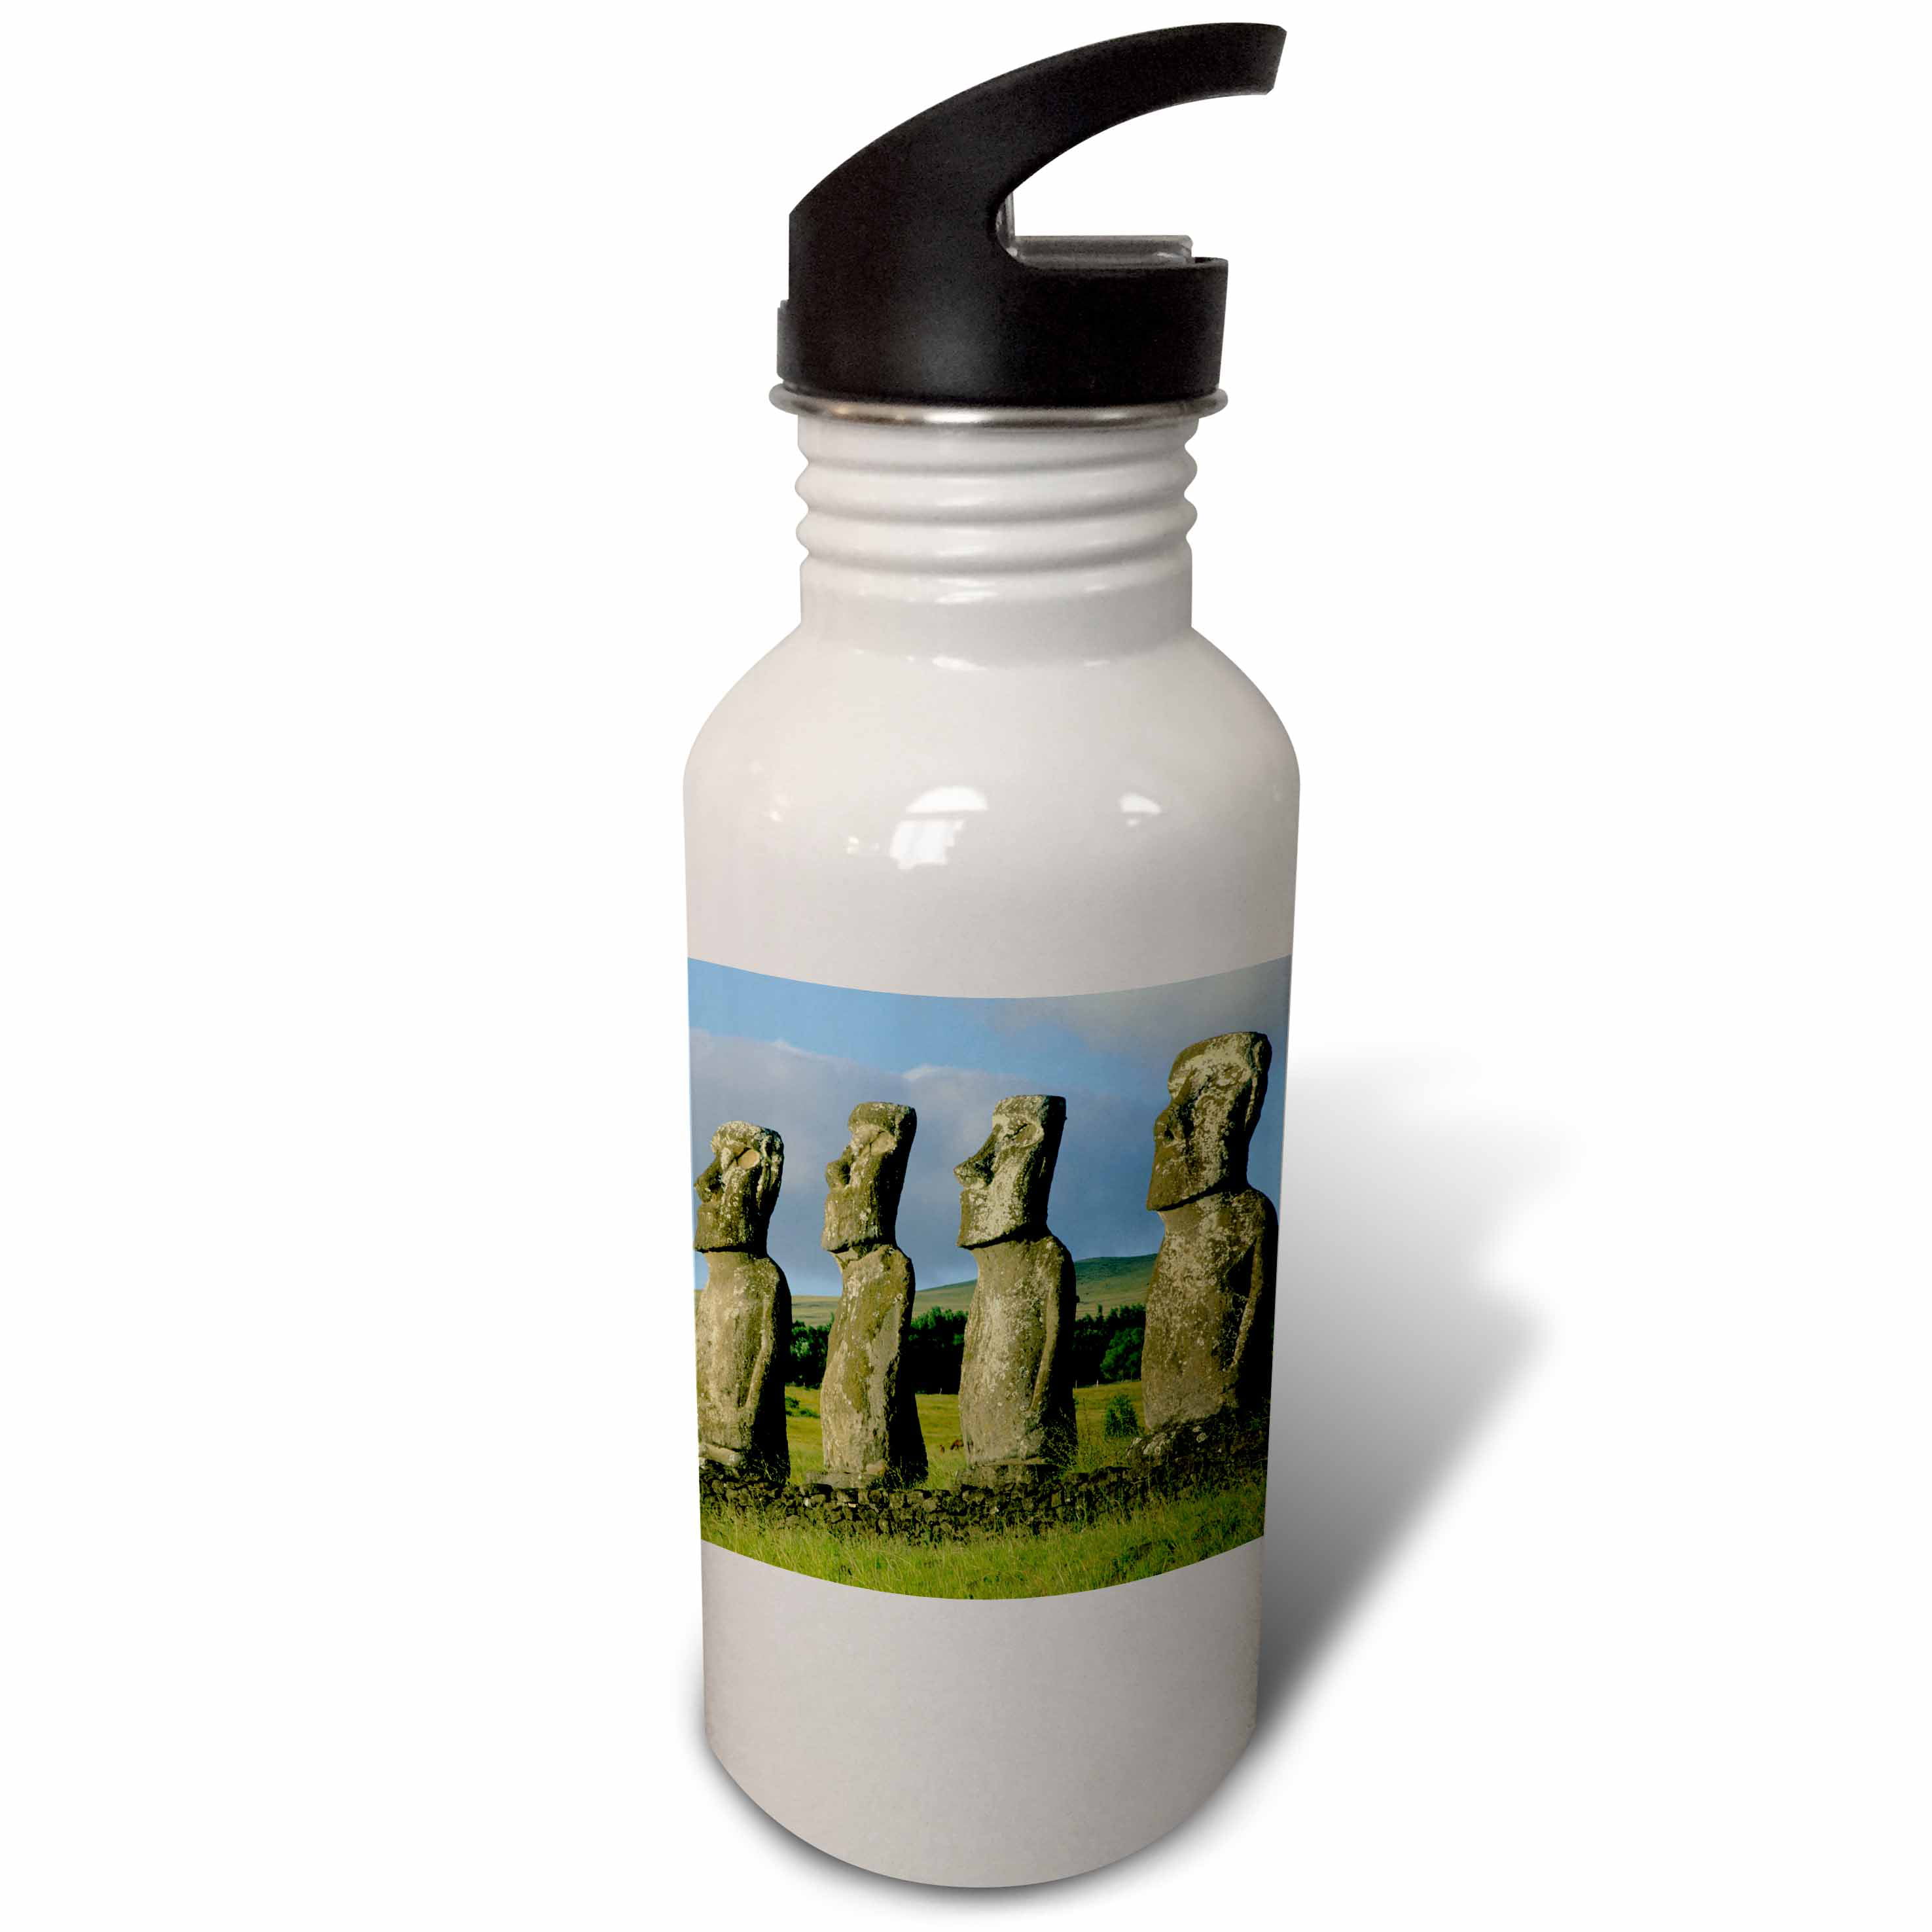 Quechua MH100 Stainless Steel Screw Cap Hiking Water Bottle 20oz